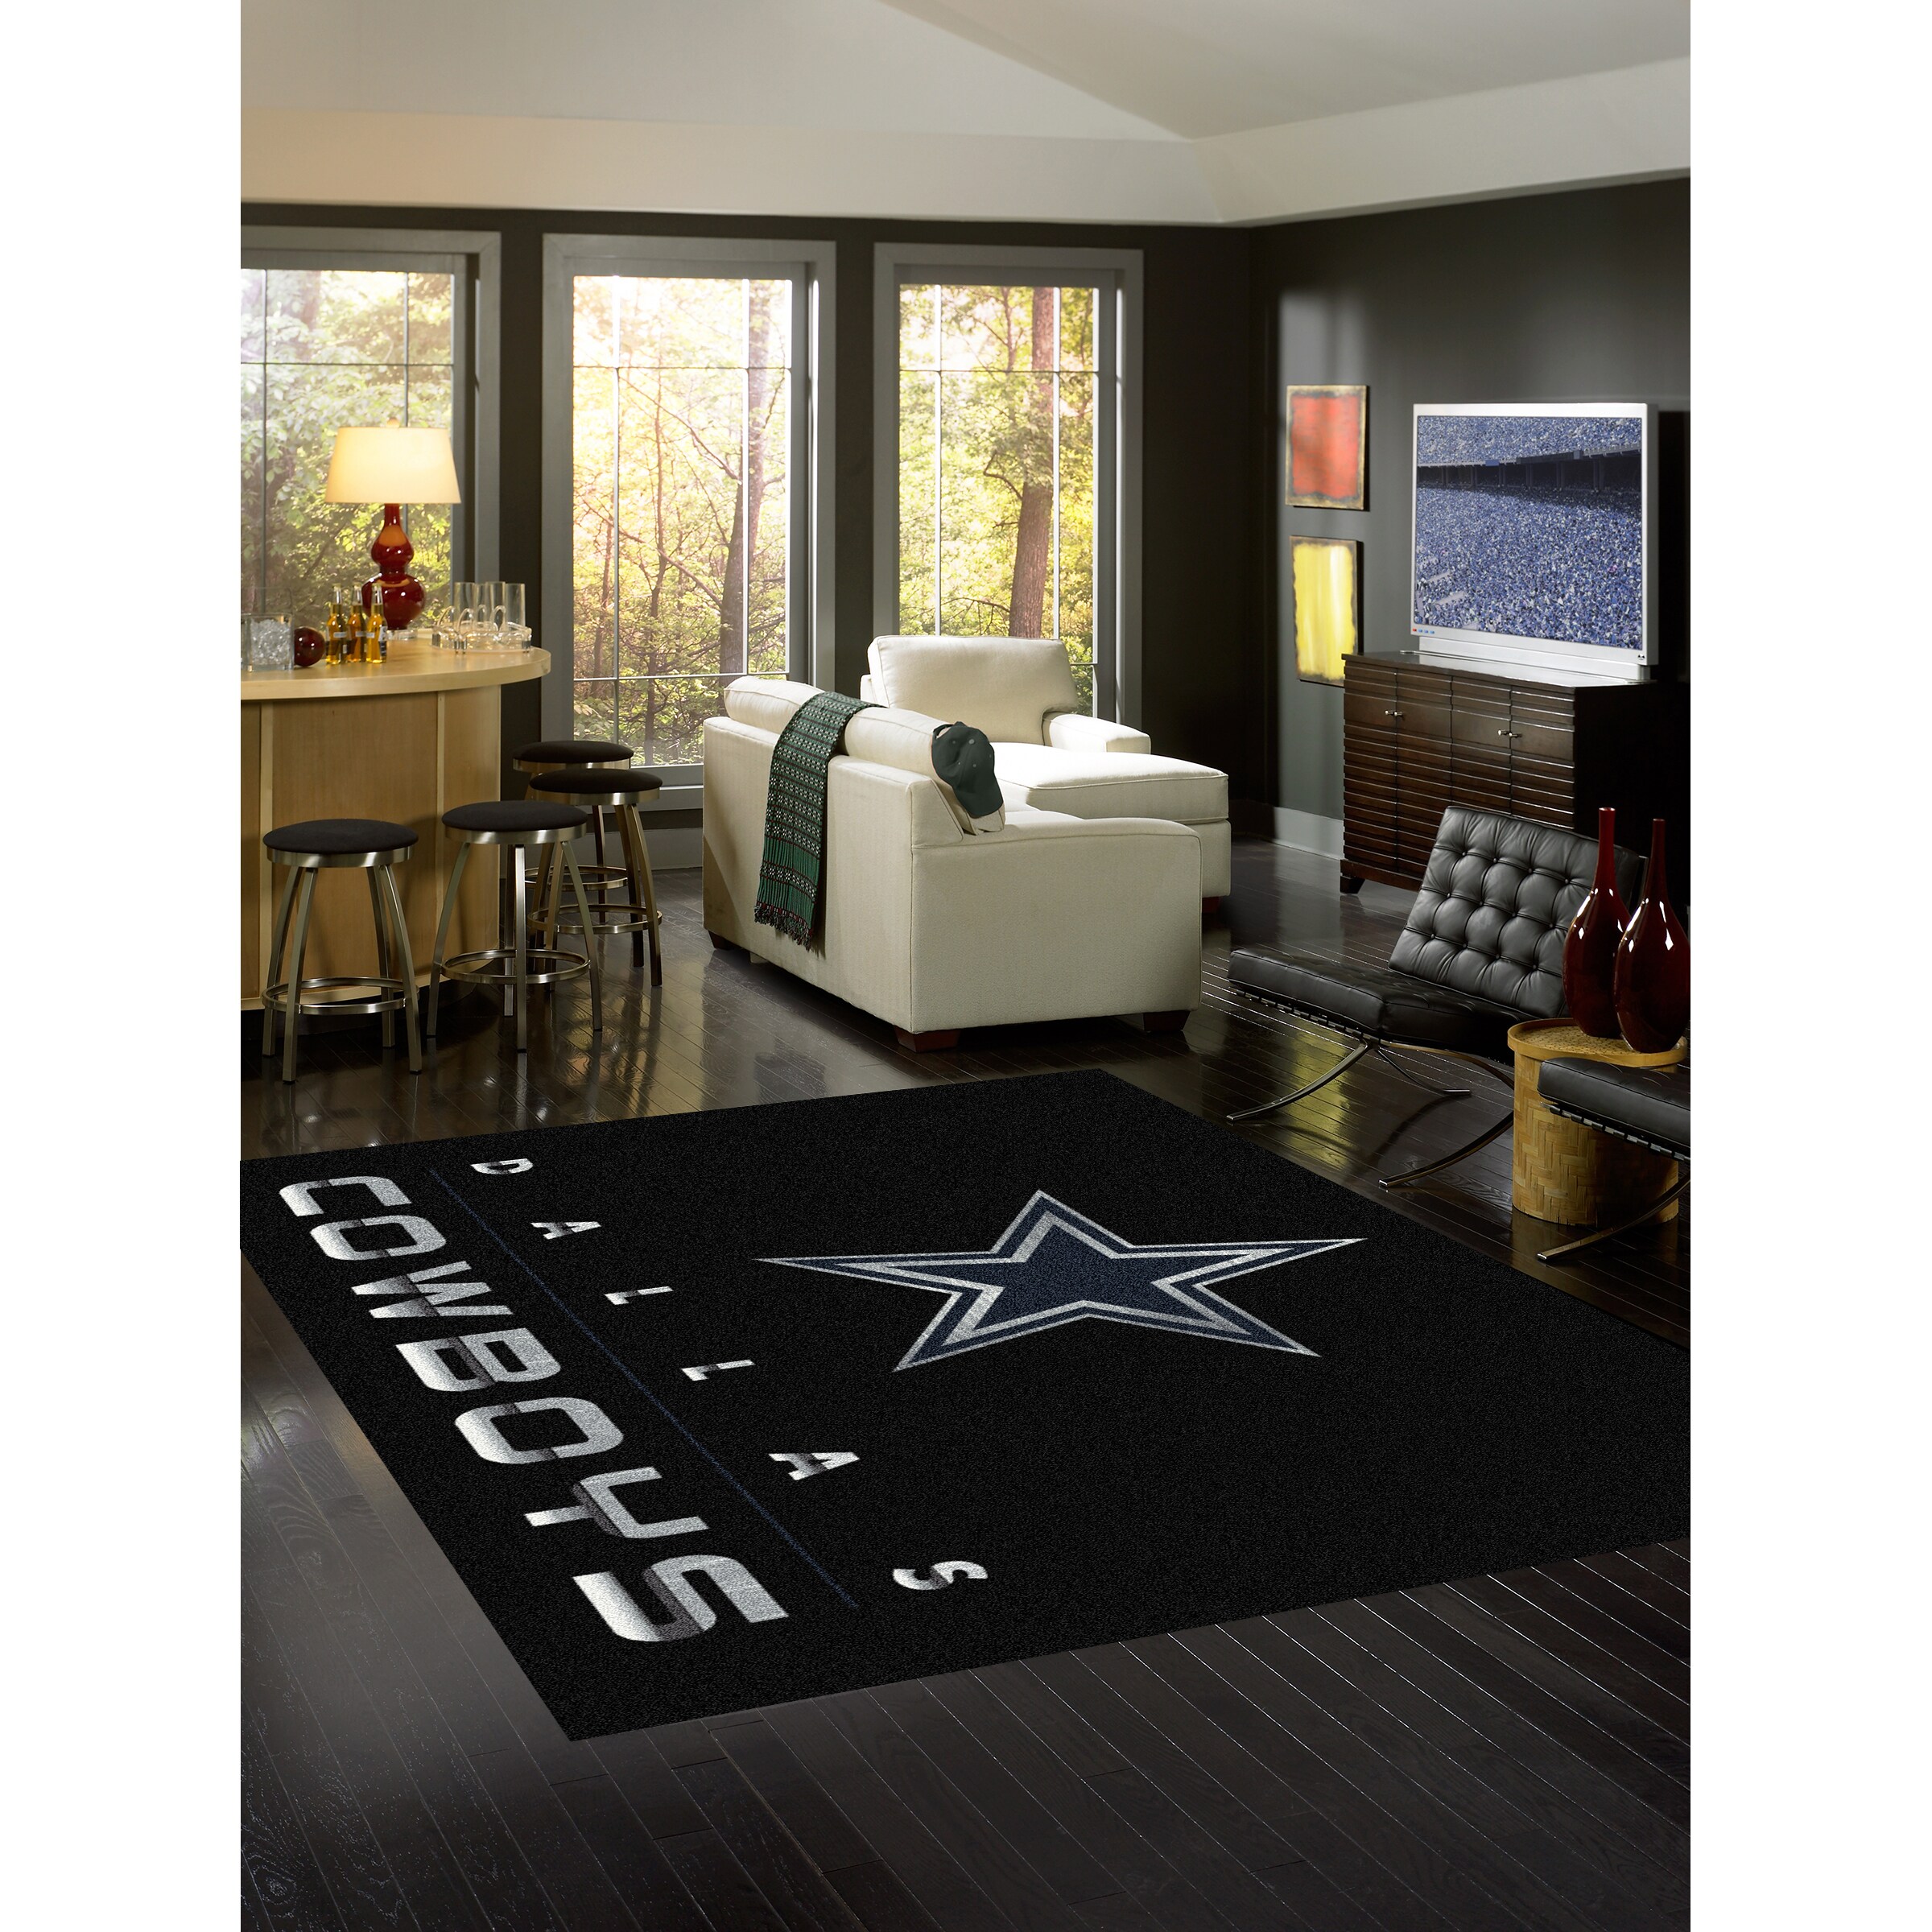 Imperial International Dallas Cowboys 8 x 11 Gray Area Rug - Officially Licensed NFL Rug - Made in USA - Fade Resistant - Waterproof - Easy to Clean -  IMP  531-5002